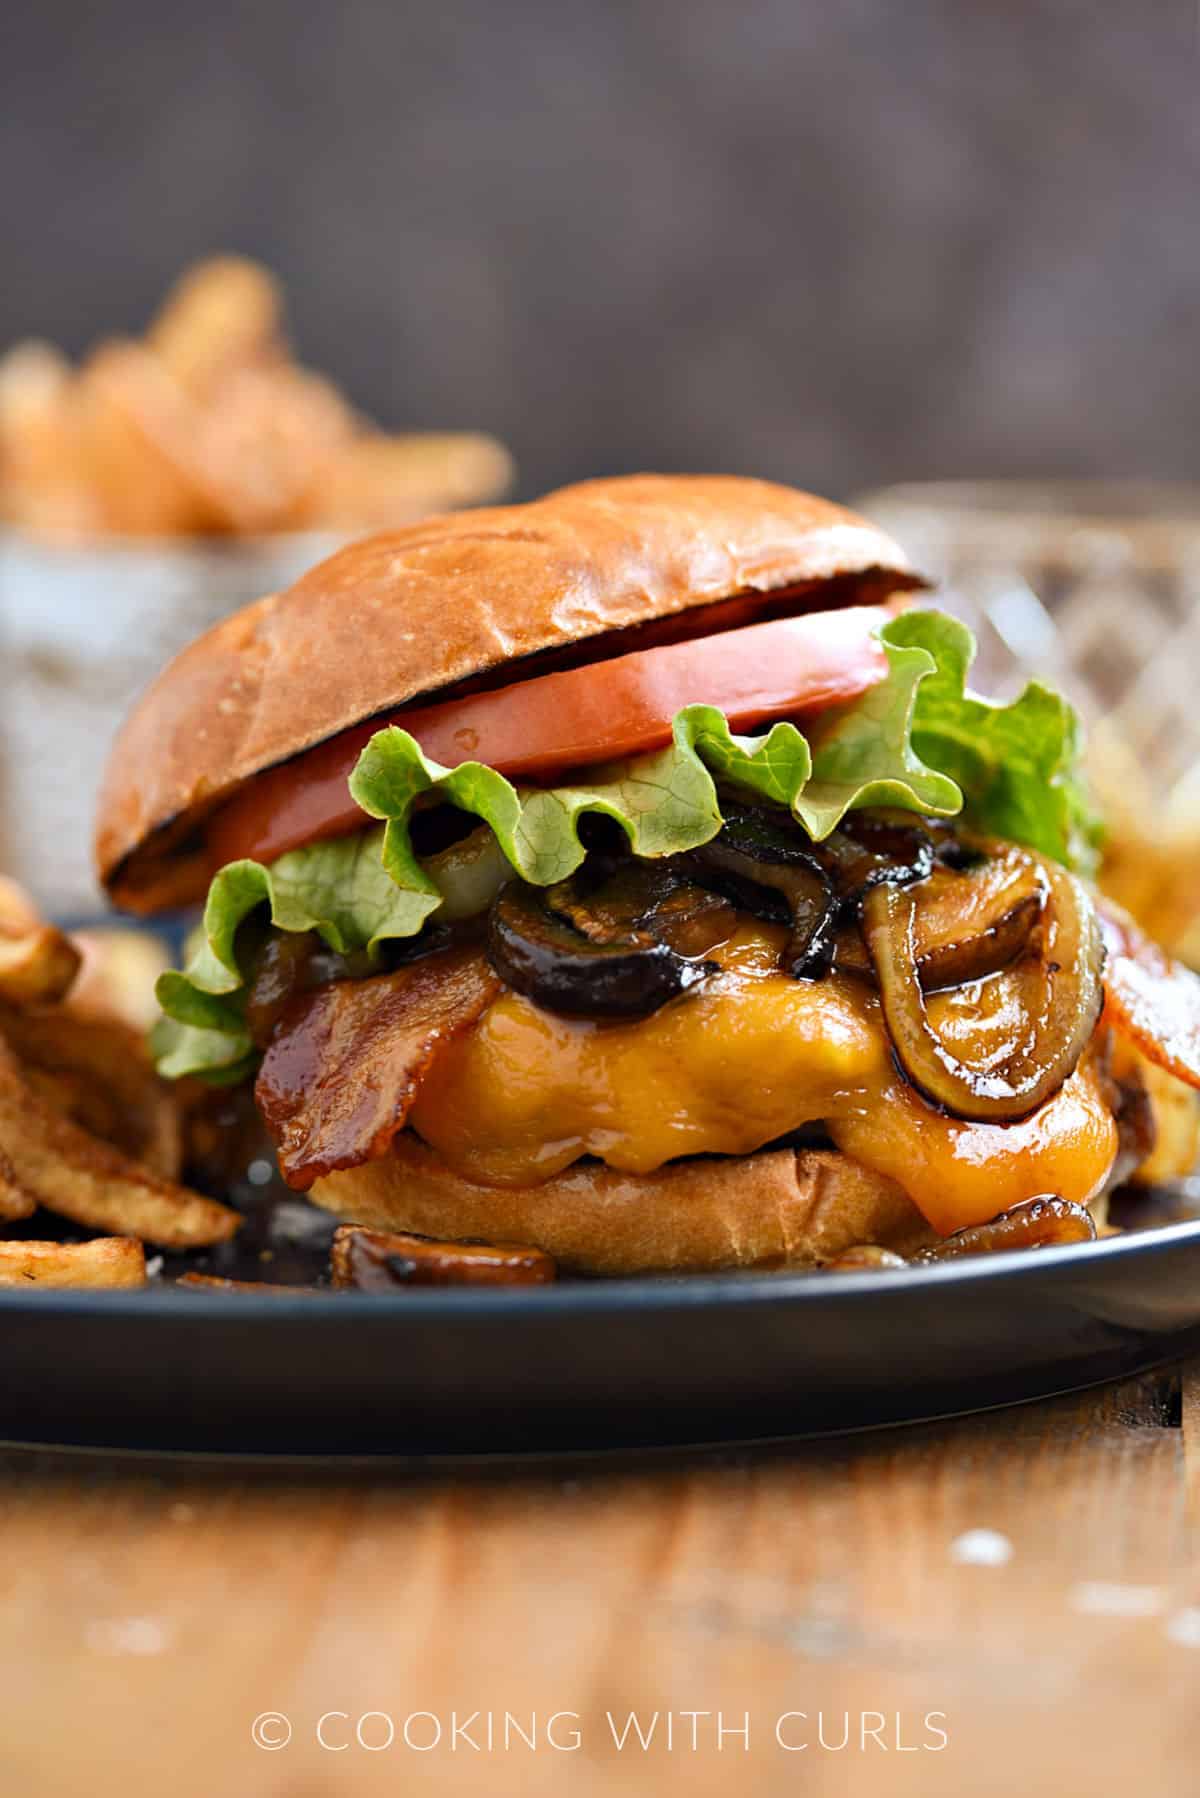 Burger topped with melted cheddar cheese, onions, mushrooms and glaze with fries on the side.